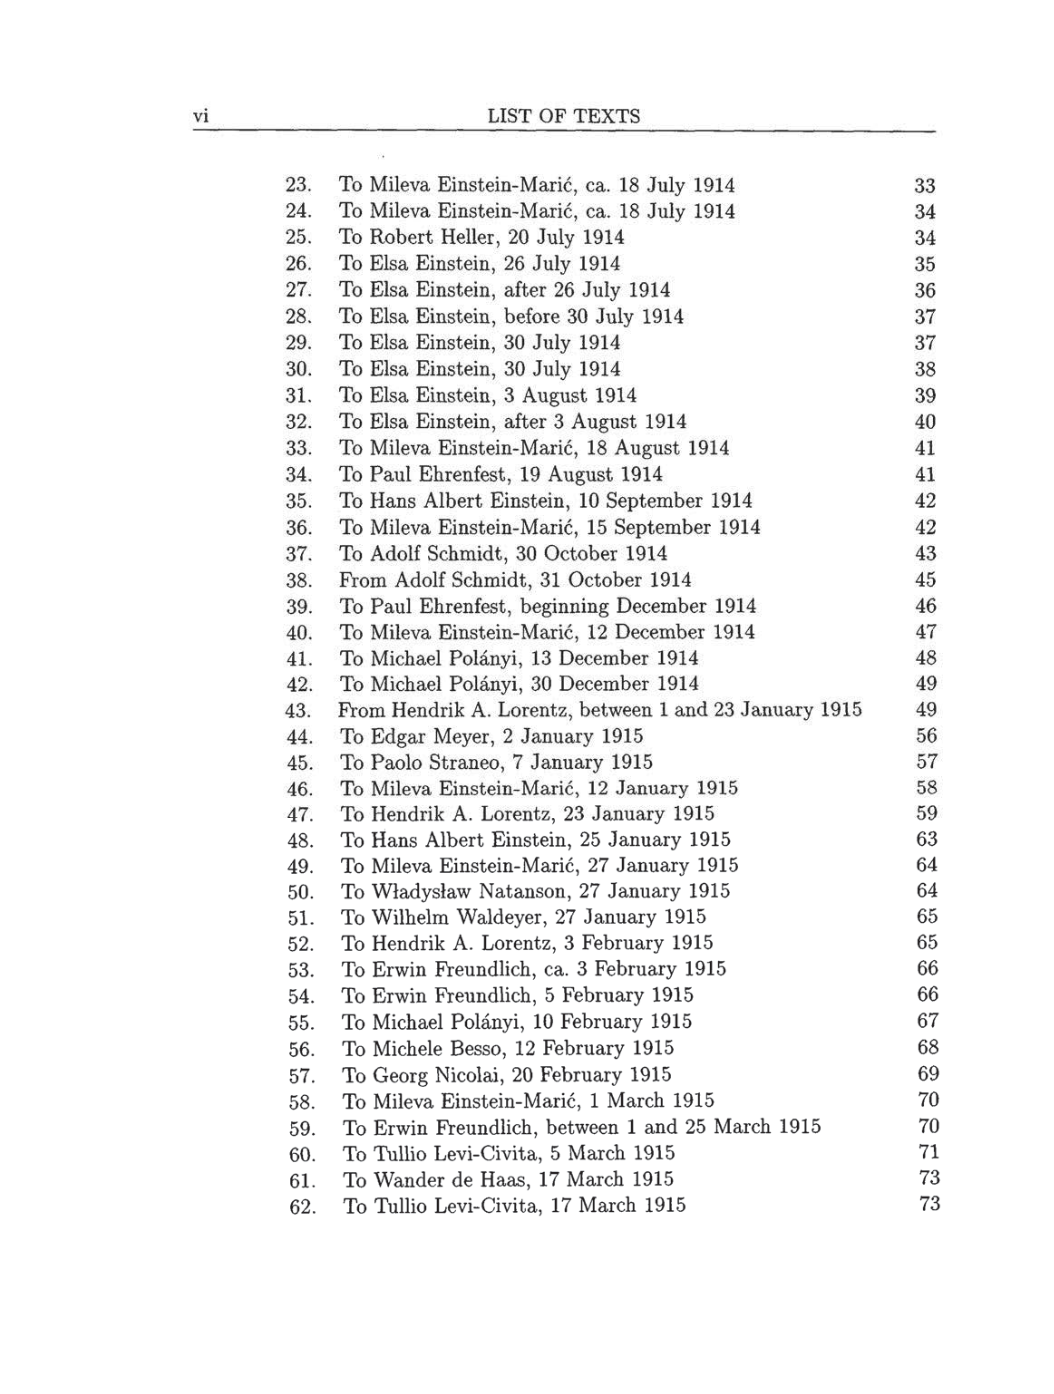 Volume 8: The Berlin Years: Correspondence, 1914-1918 (English translation supplement) page vi